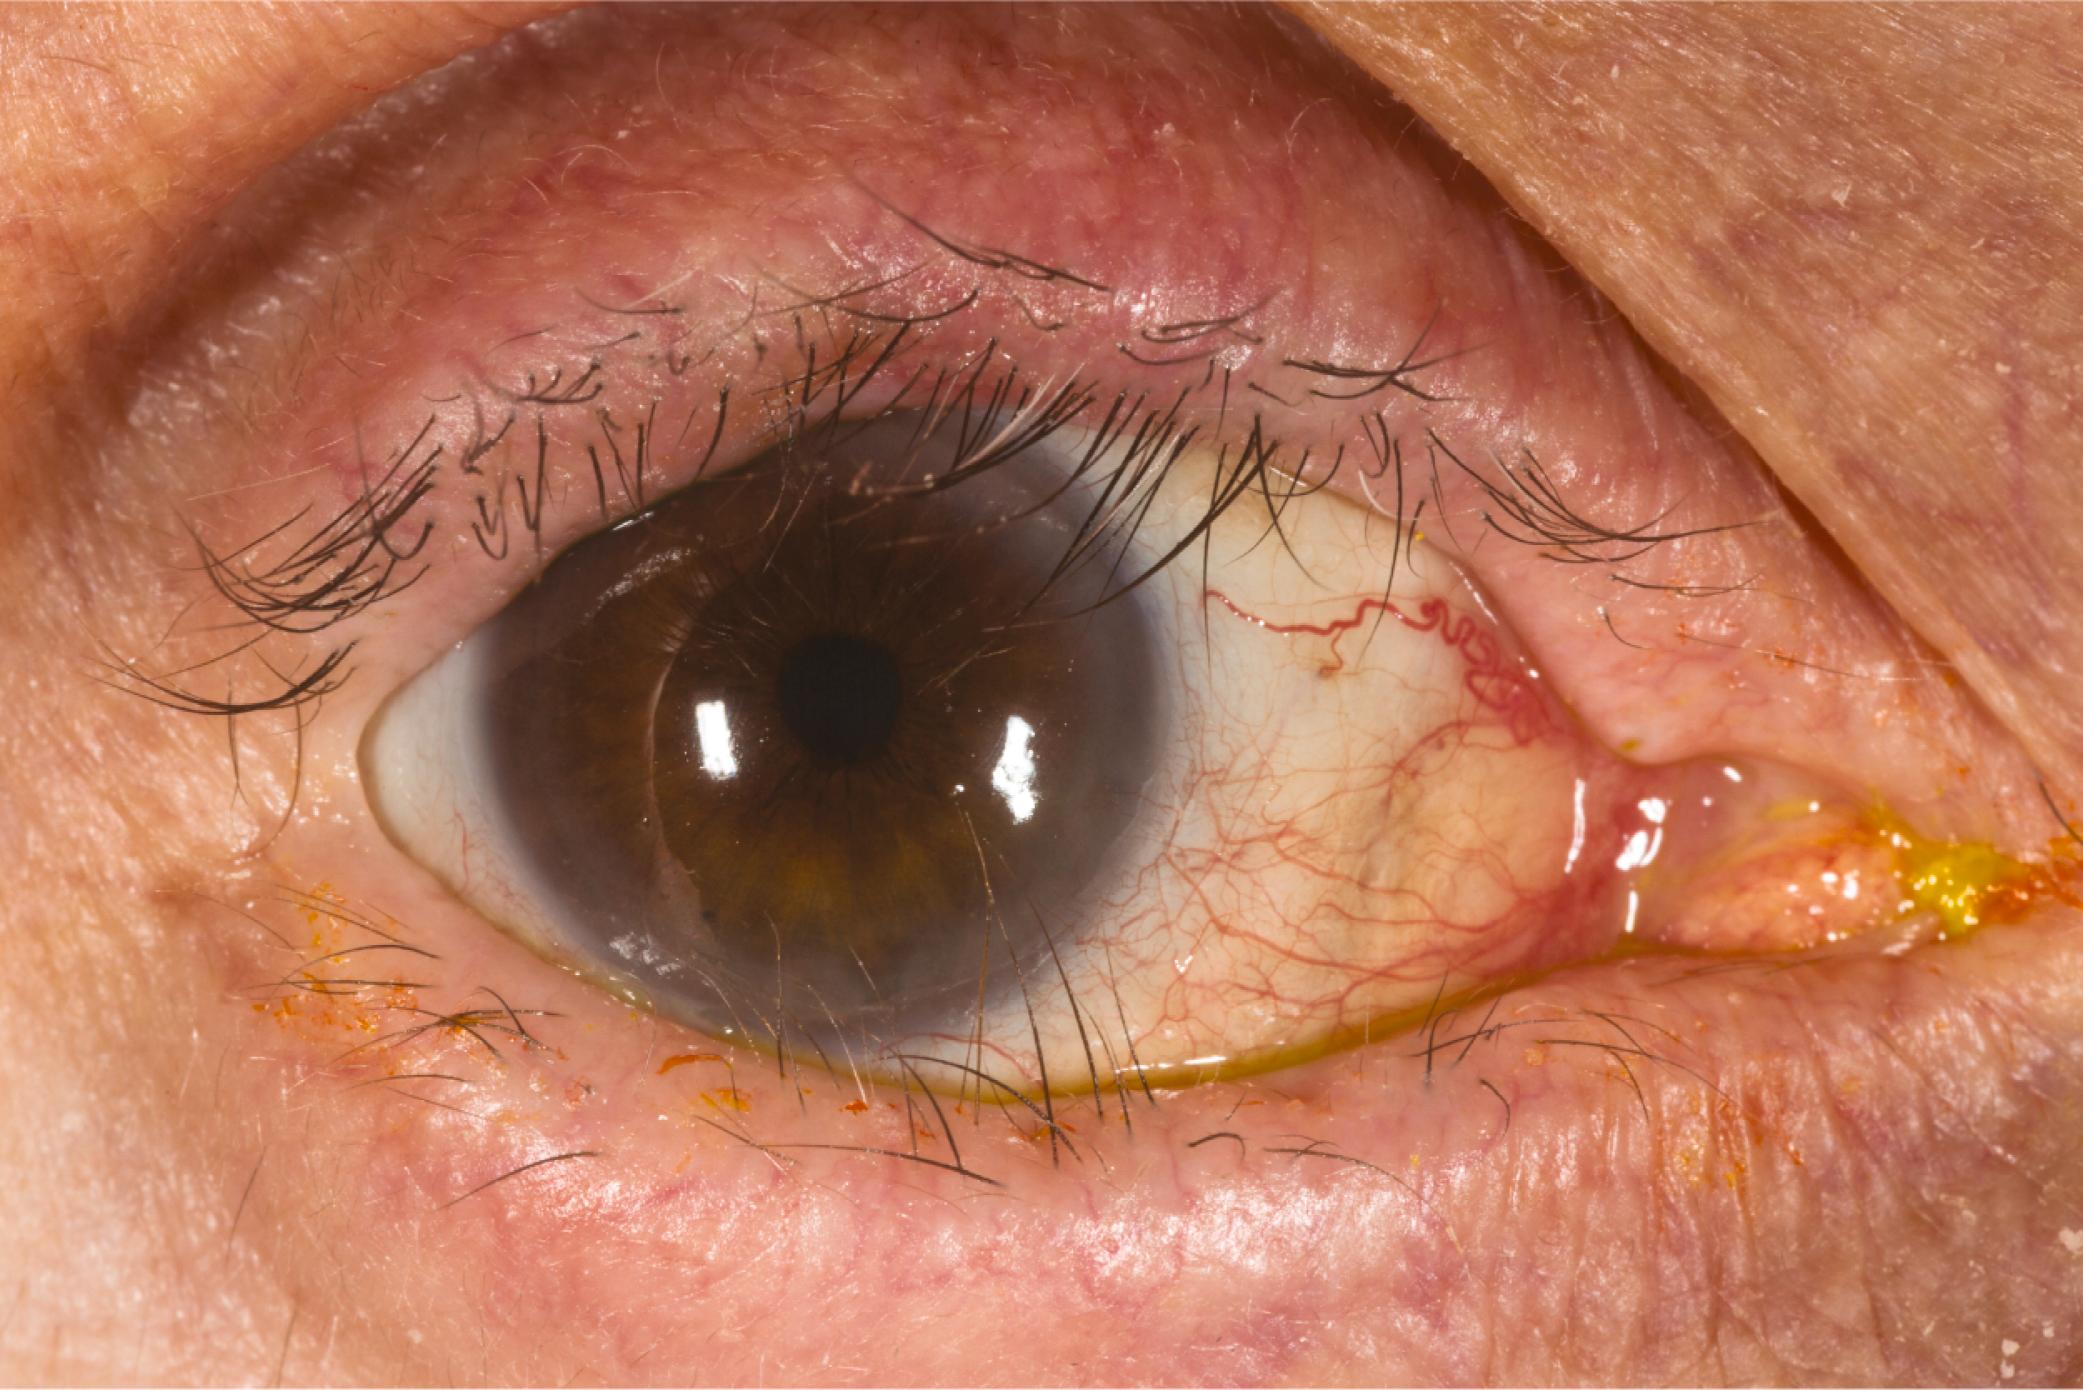 Figure 5.7, The eyelashes are misdirected against the eye. The eyelids appear to be rolled inward somewhat. No focal scarring of the posterior lamella was present. Is this a case of trichiasis or entropion? This example illustrates the importance of the concept of posterior lamellar shortening in understanding both cicatricial entropion and the trichiasis of marginal entropion.